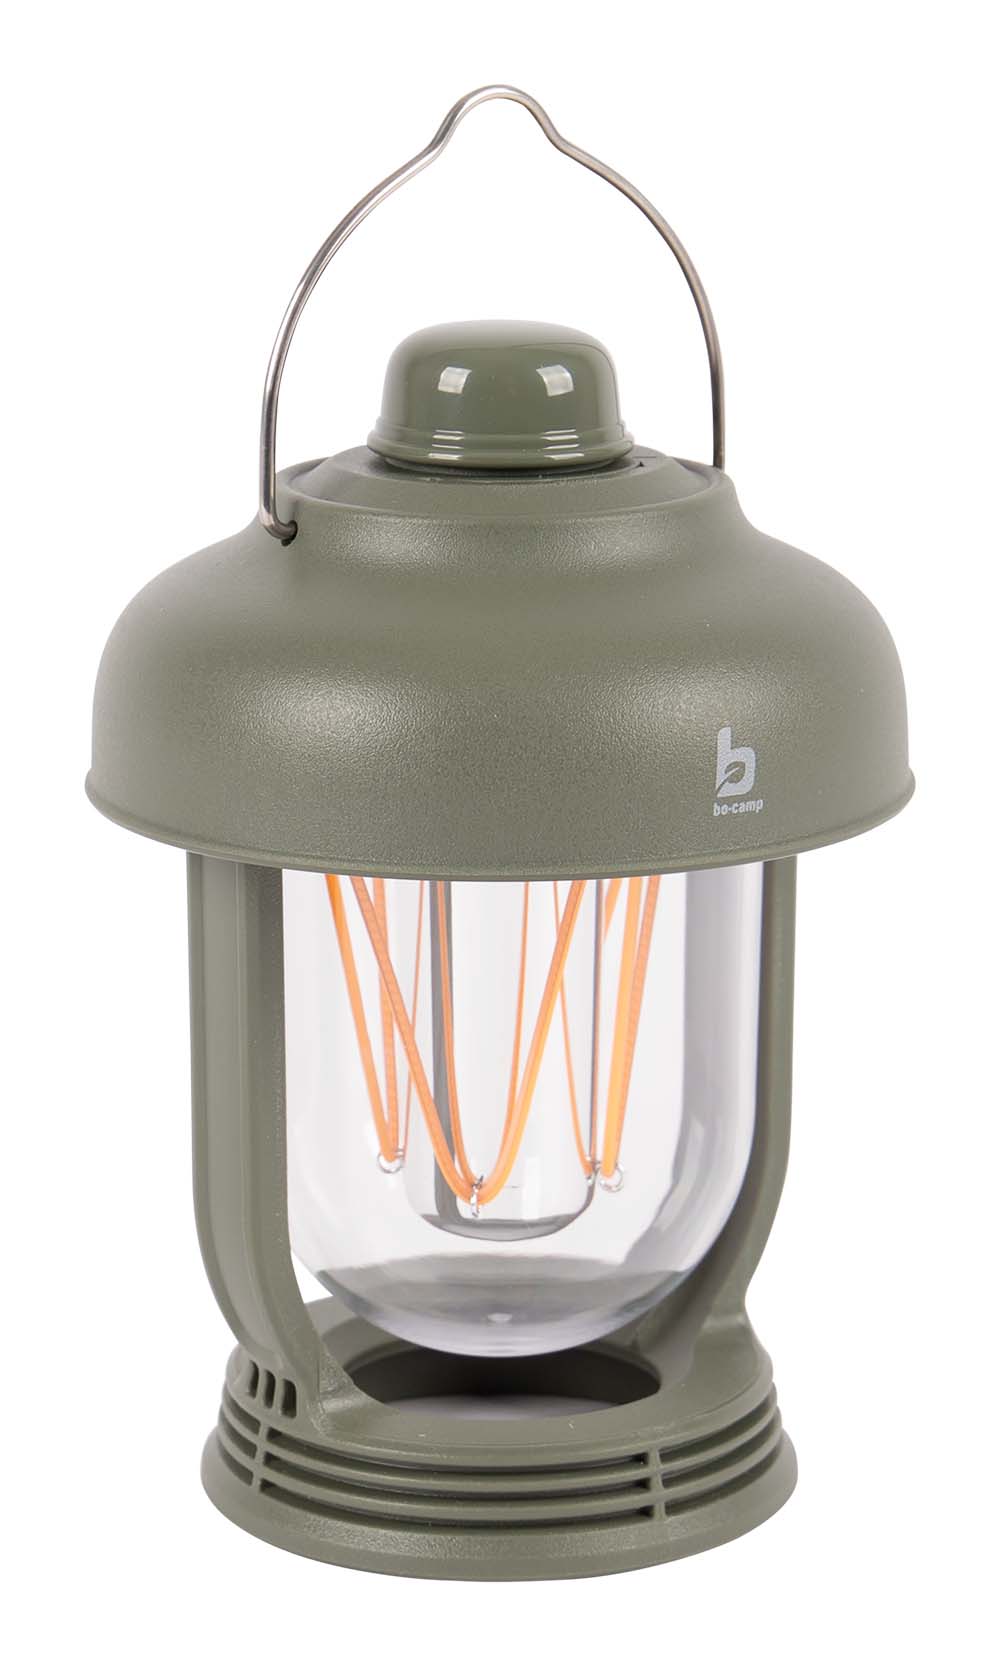 5818979 A modern table lantern from the Industrial collection. The lantern has a warm white LED light with stepless dimming function. Furthermore, it has a built-in Li-ion battery which can be charged with the included USB cable. Ideal for placing on a table, shelf, or hanging somewhere using the handle.